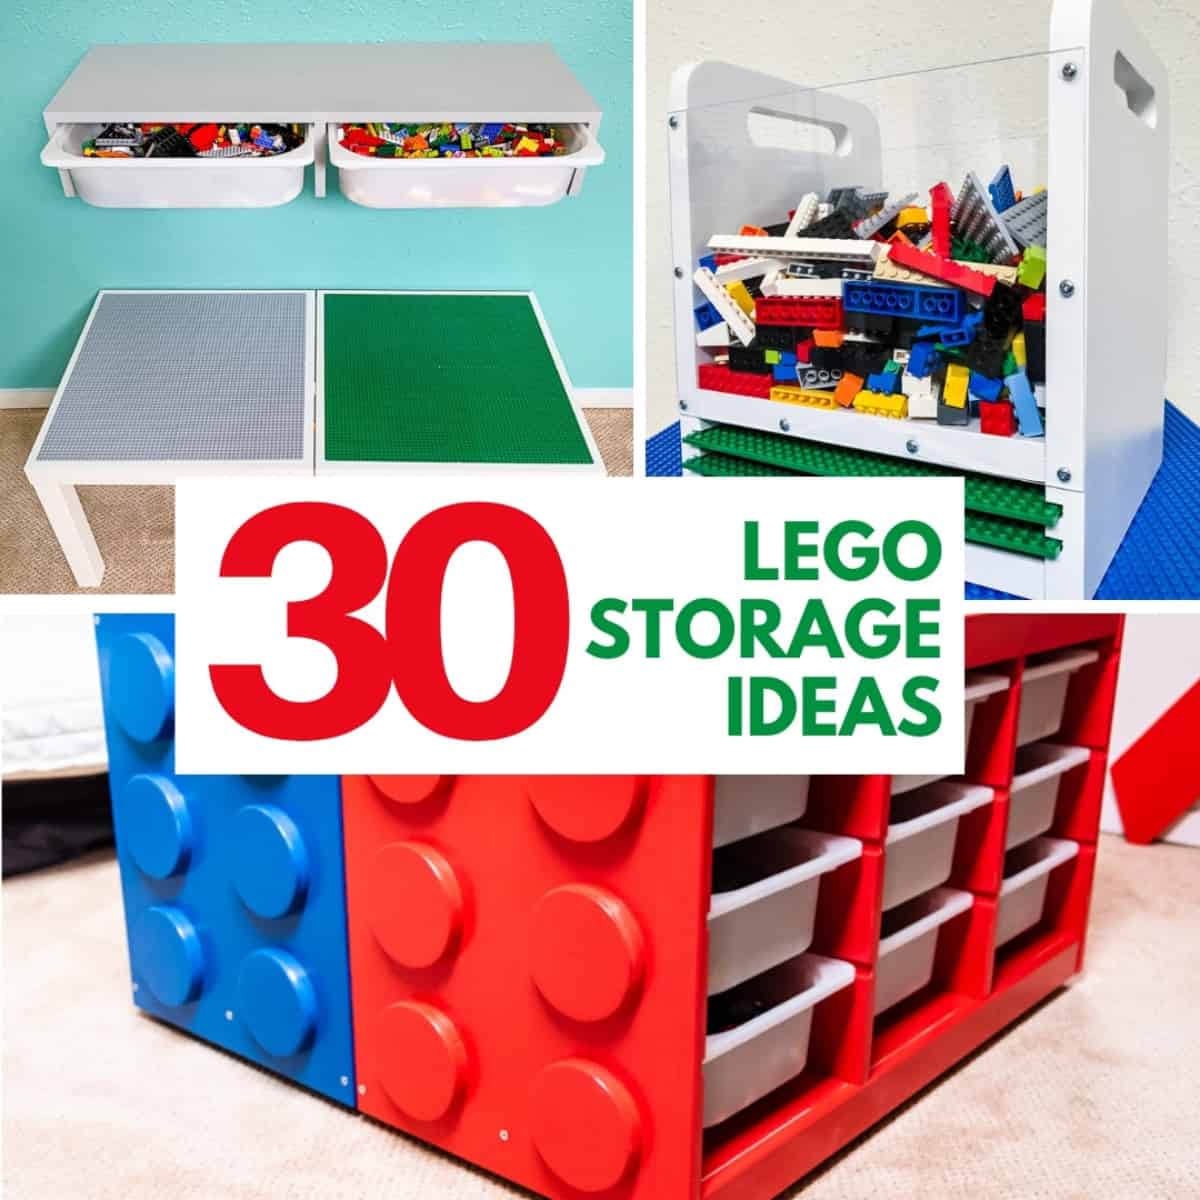 https://www.thehandymansdaughter.com/wp-content/uploads/2019/01/30-Lego-storage-ideas-featured-image.jpeg